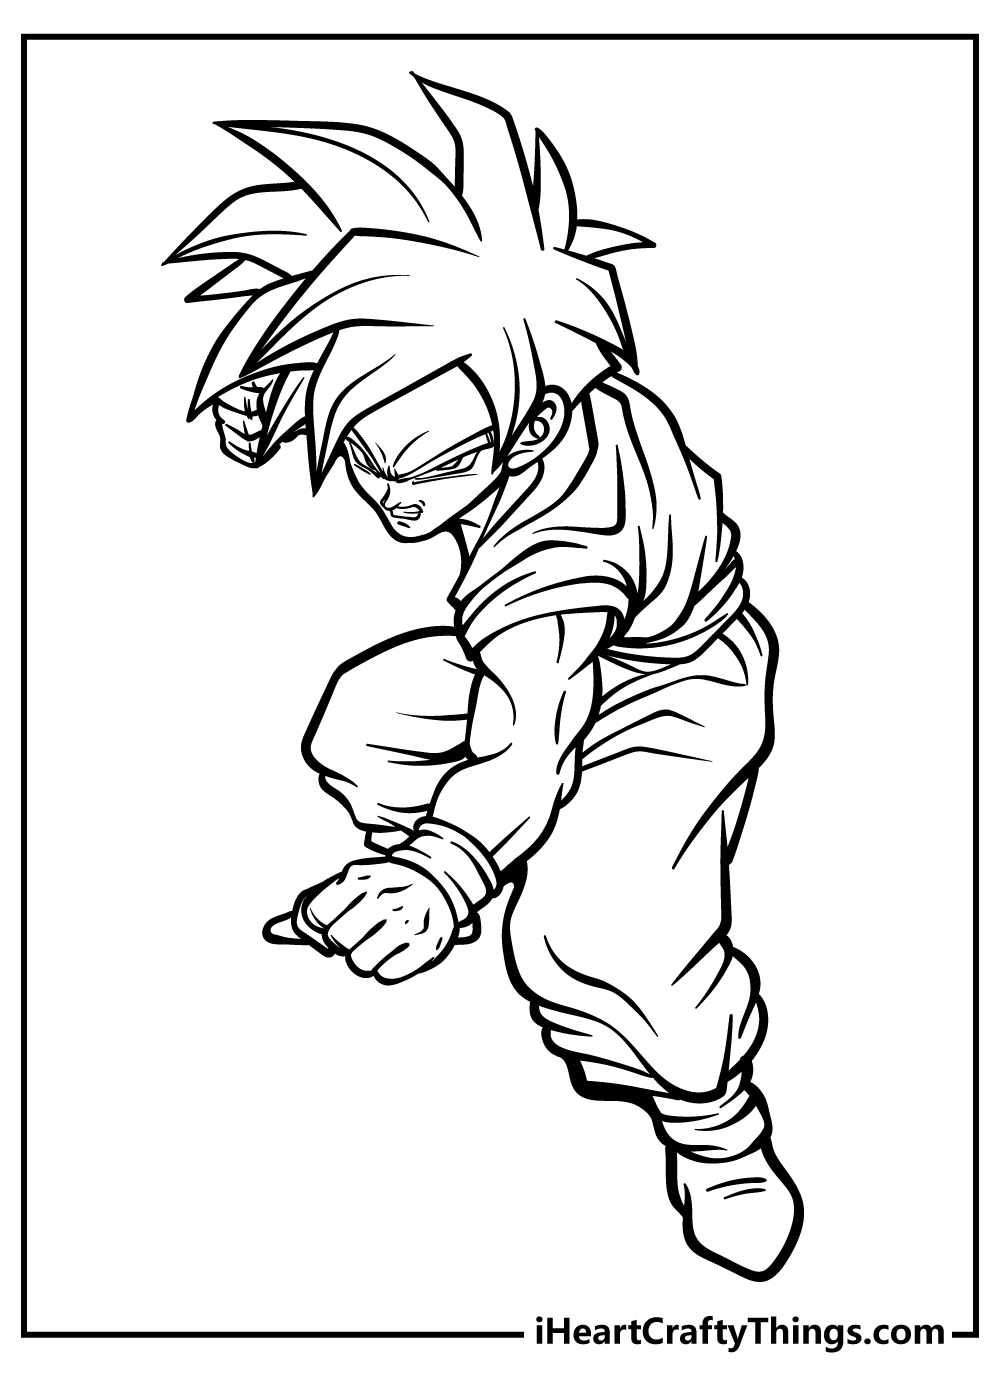 Dragon ball z coloring pages free printables